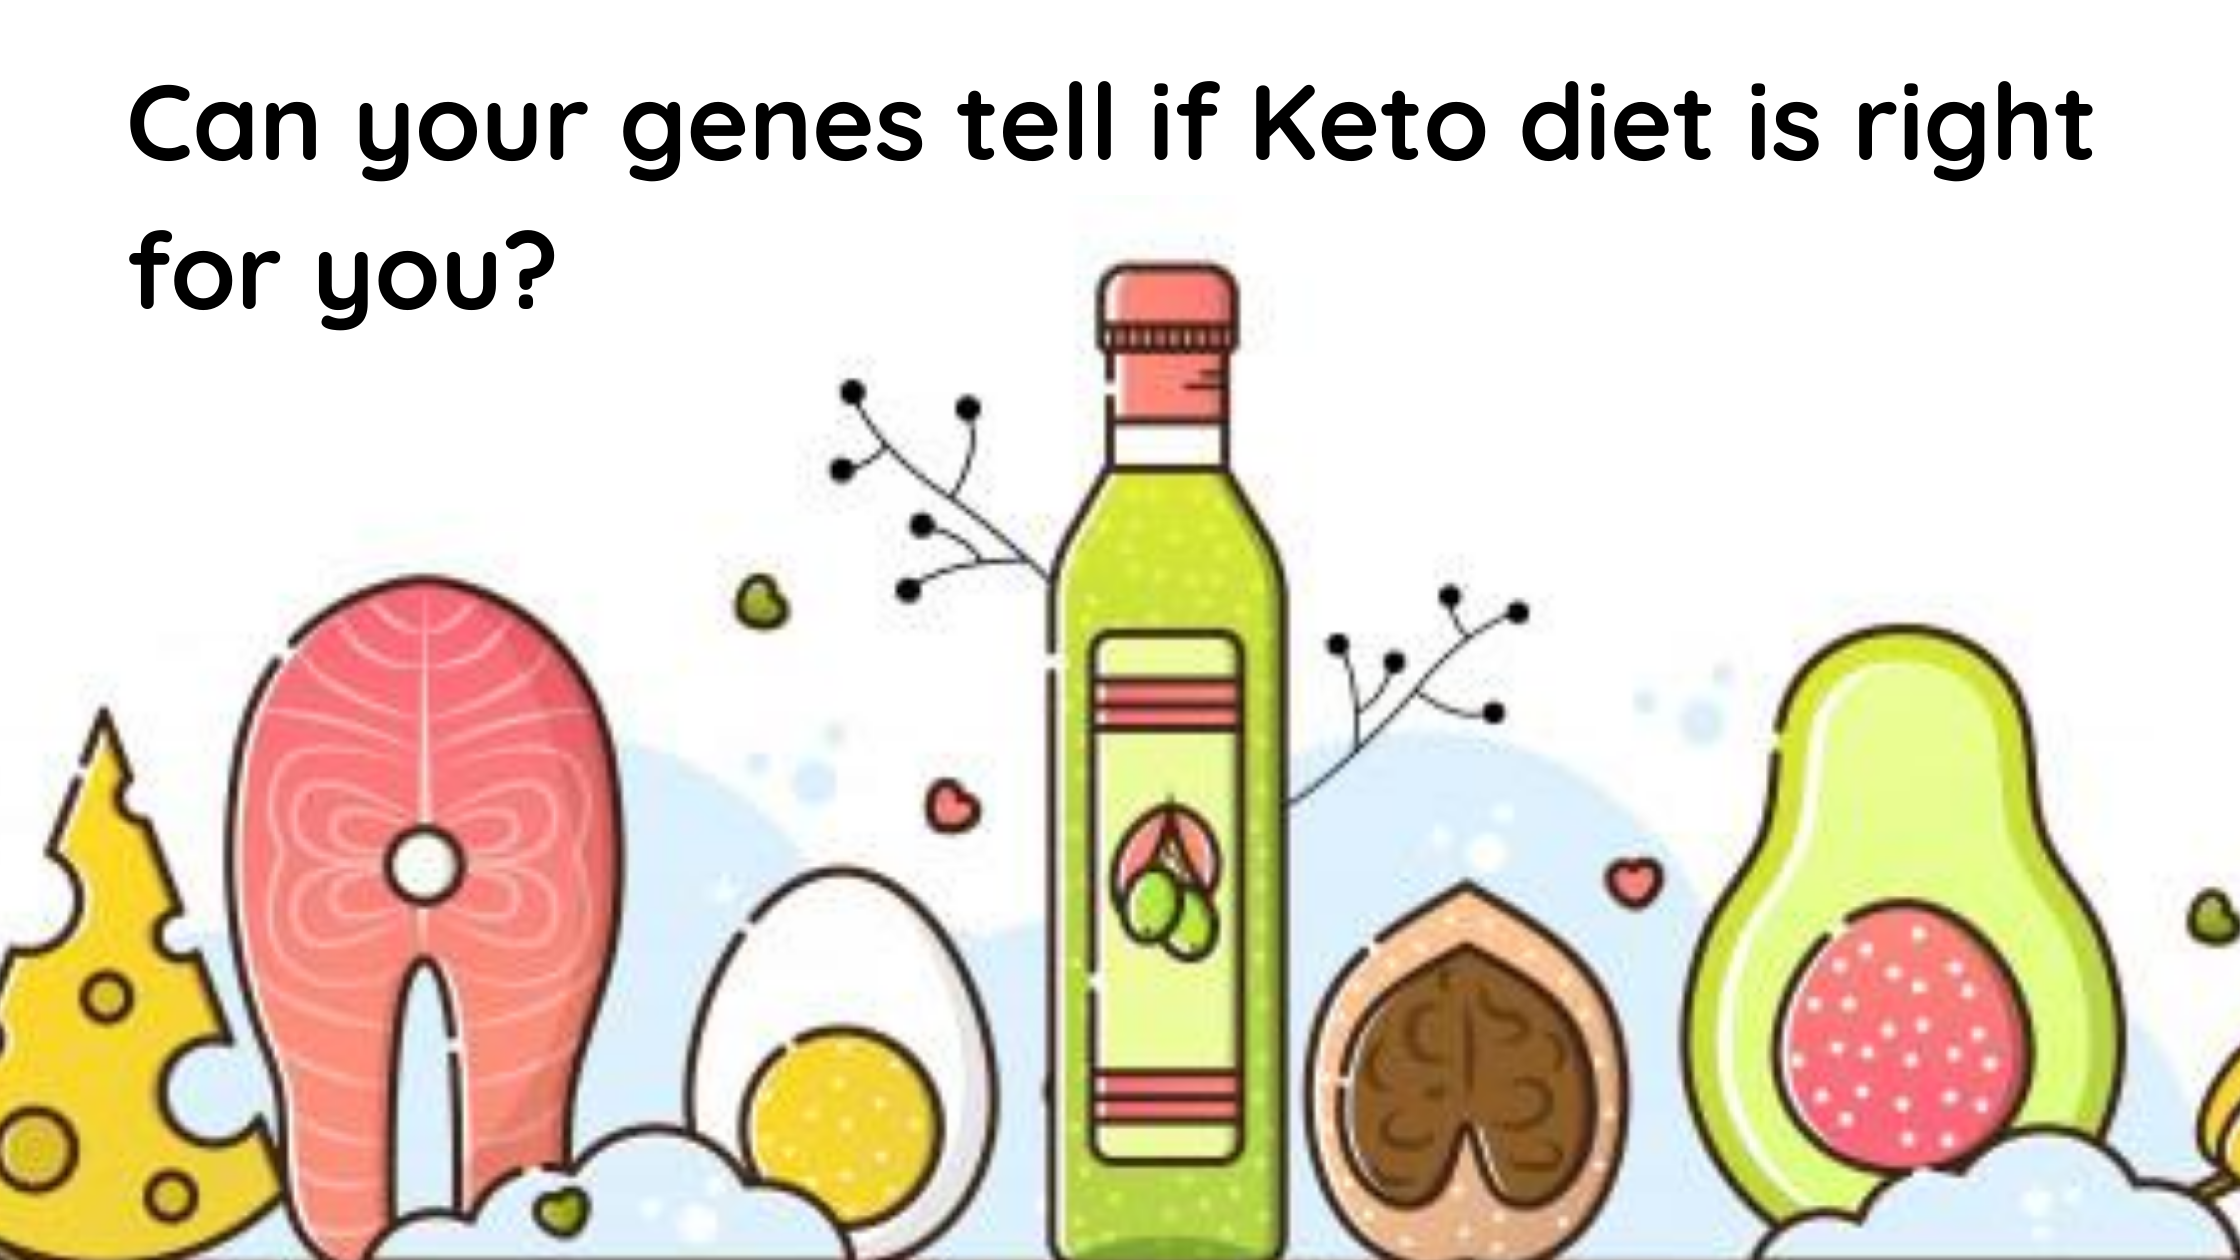 Can your genes tell if Keto diet is right for you?